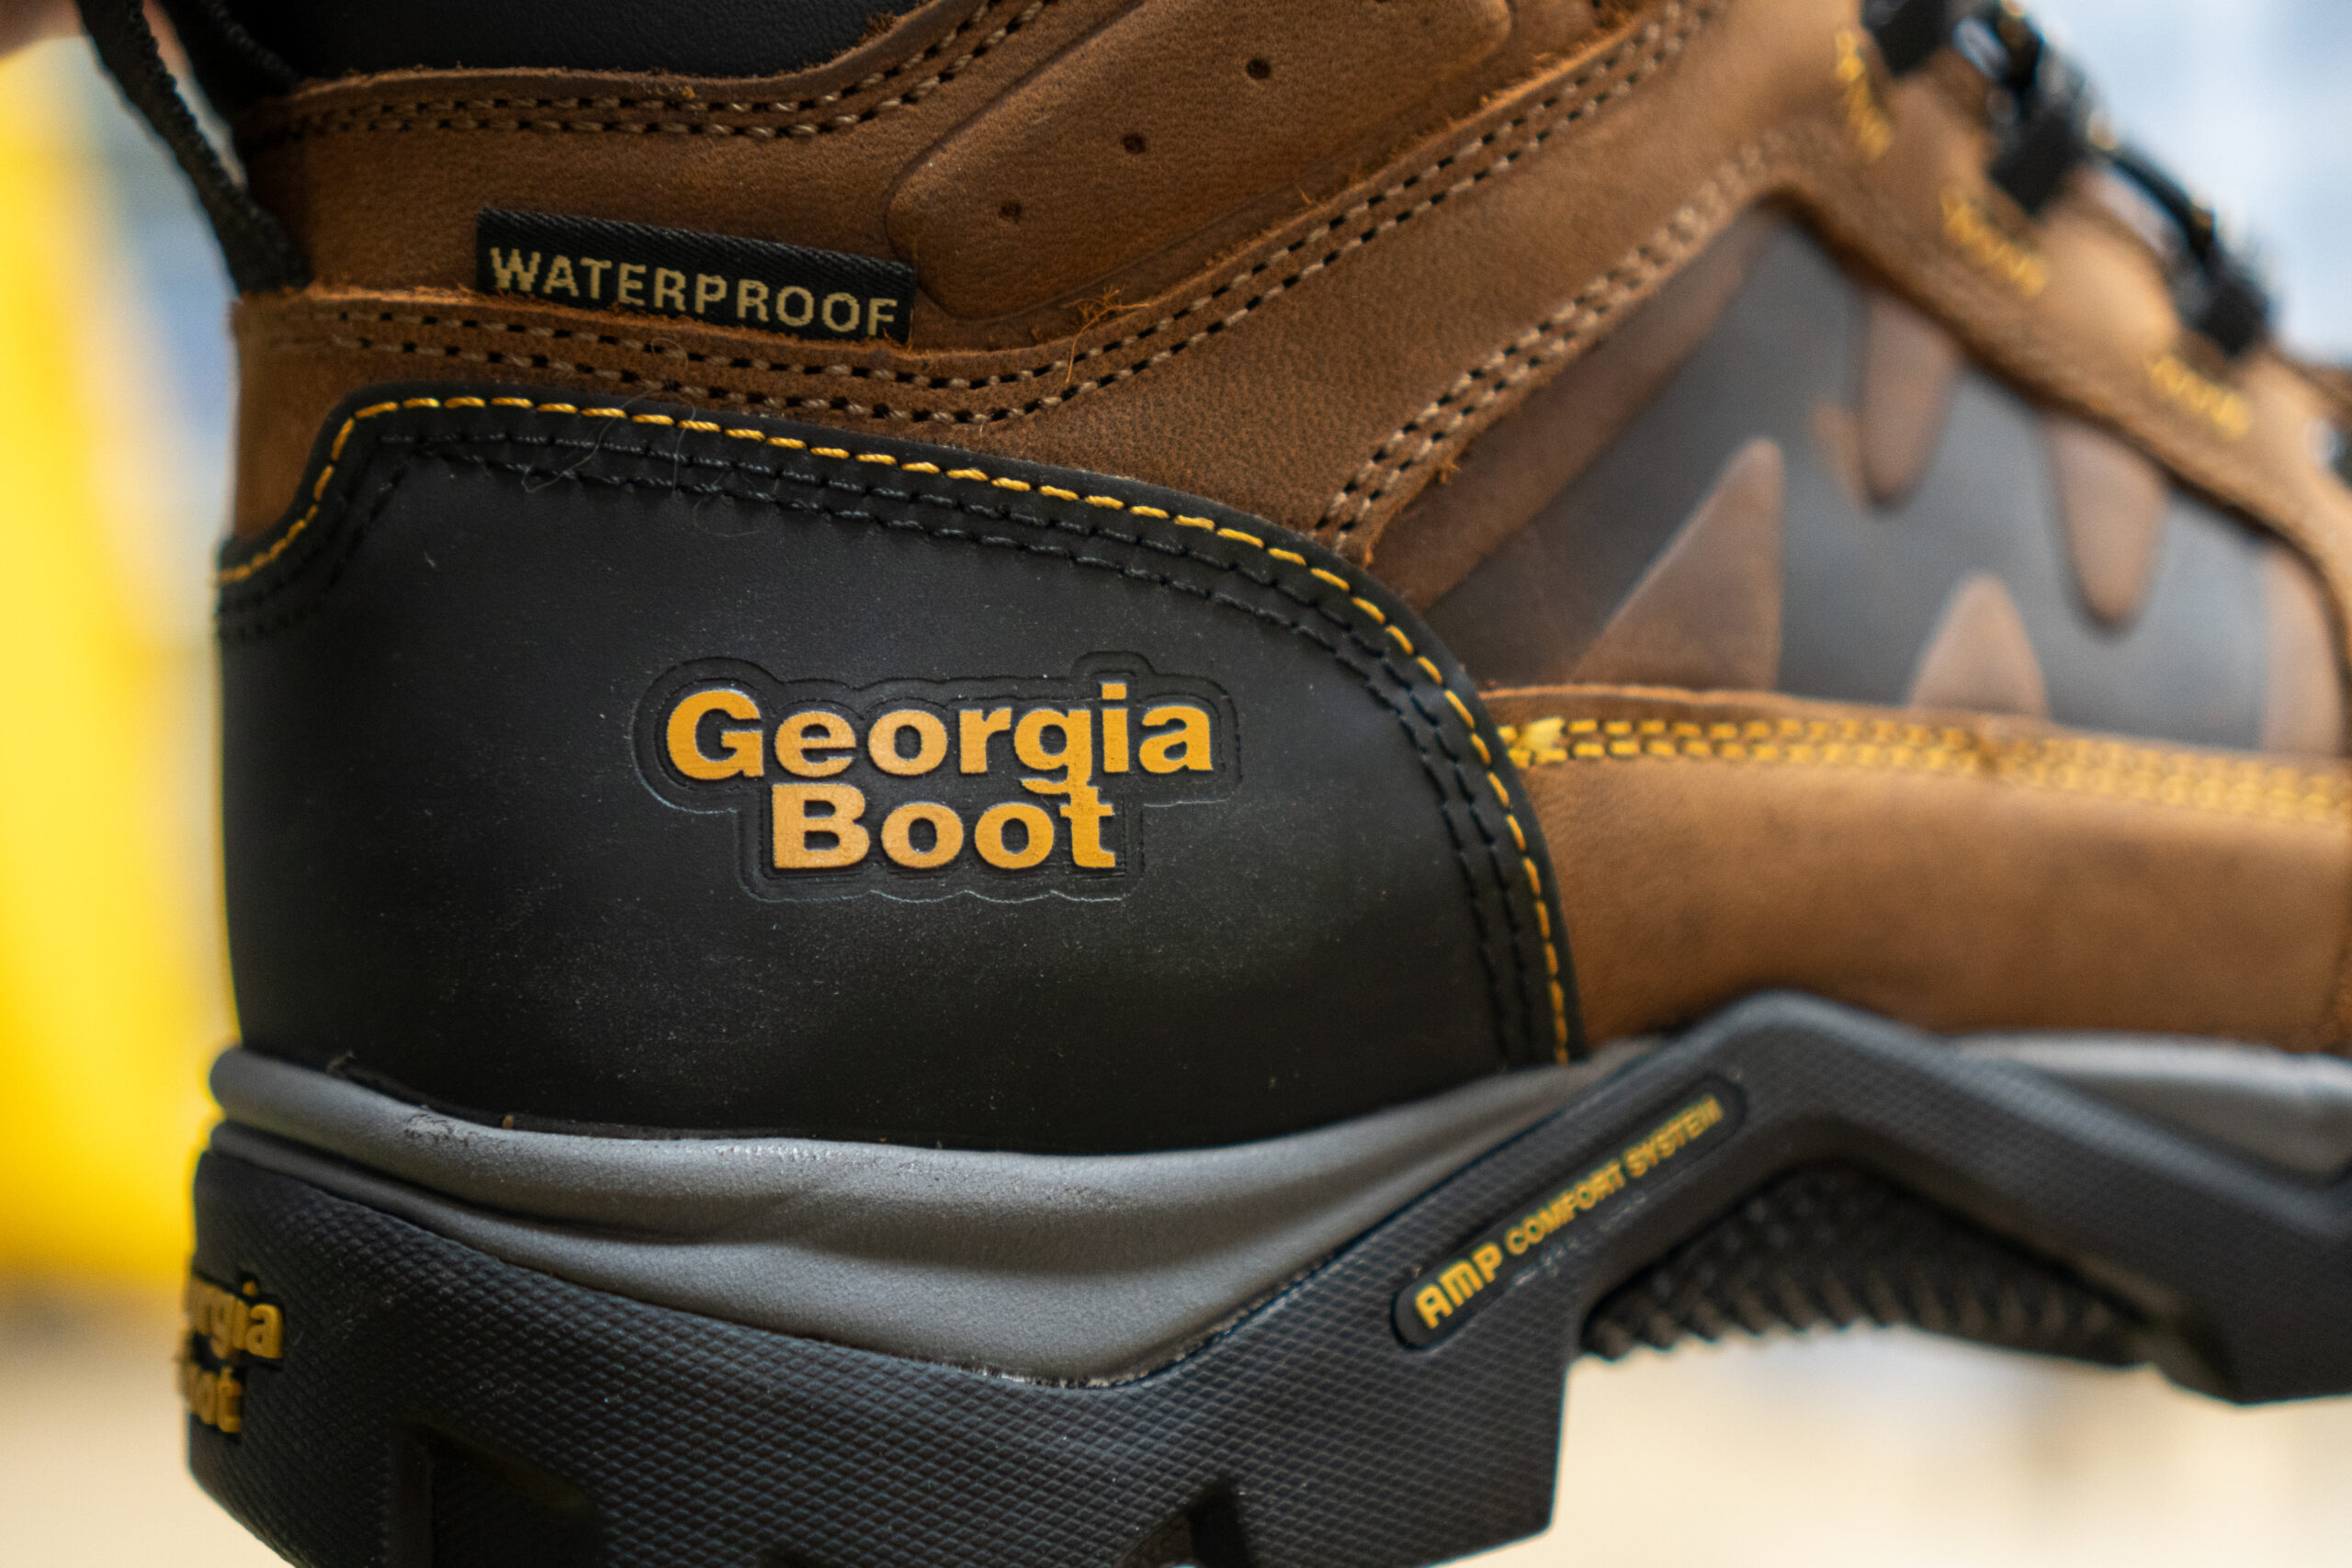 A close up of the Georgia Boot logo on the heel of a boot